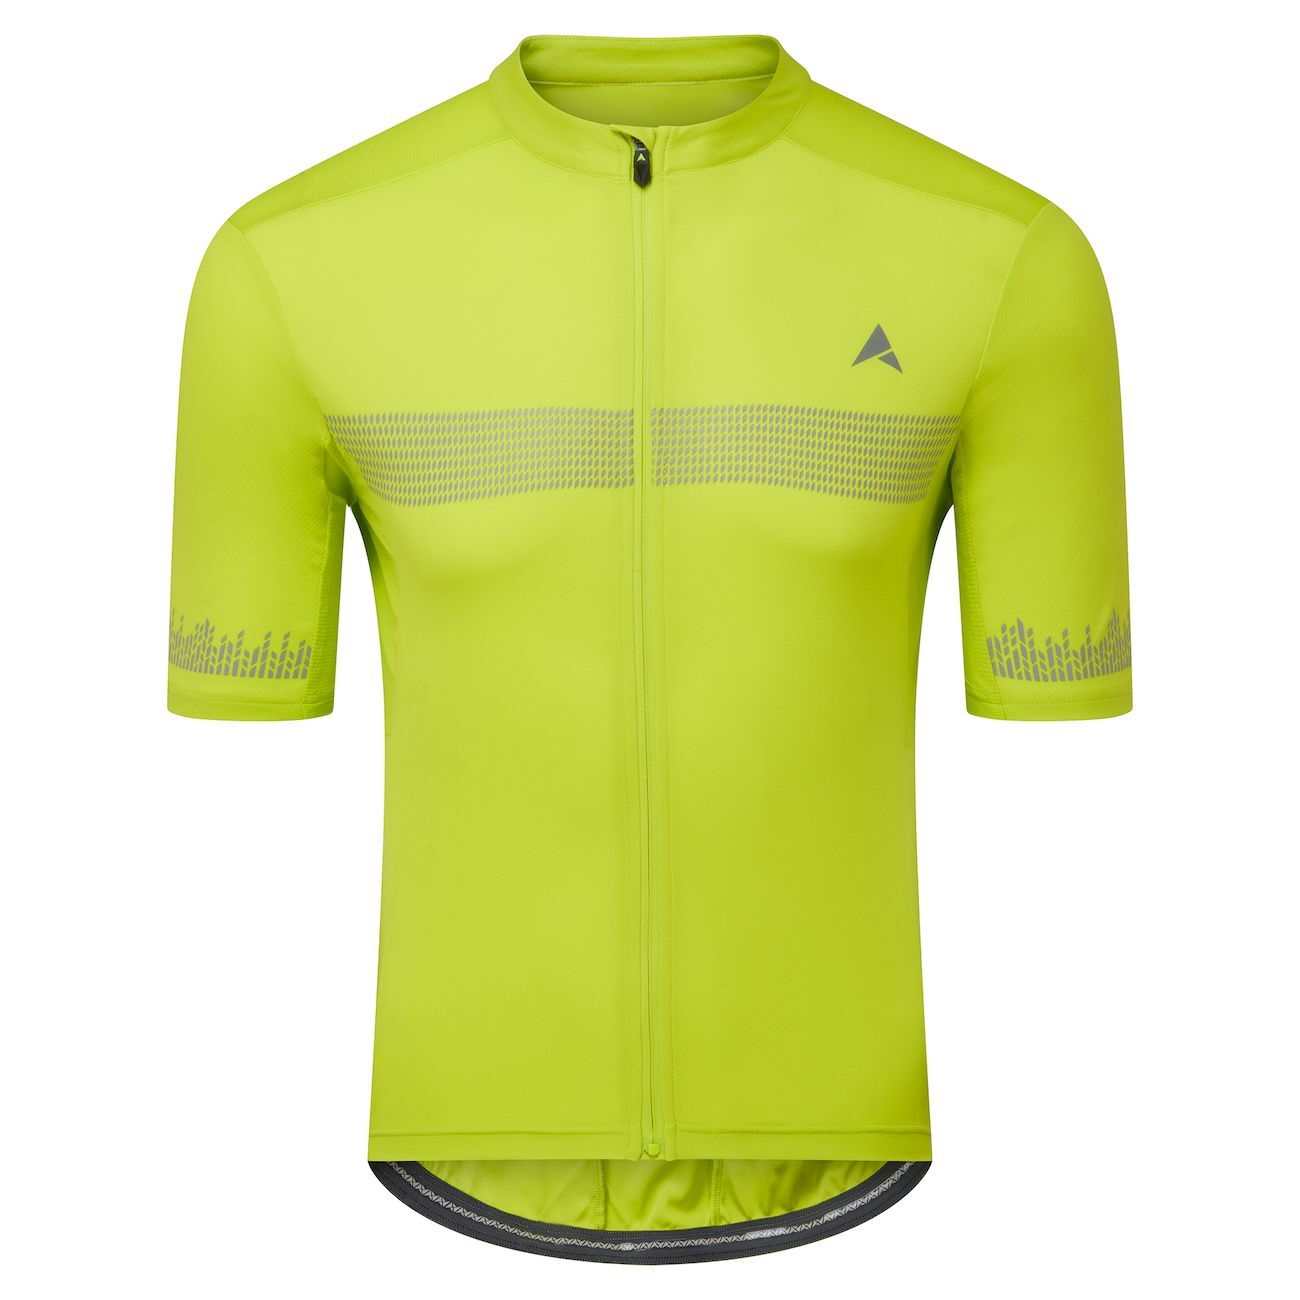 Altura Maillot Manches Courtes Nightvision - Cycling jersey